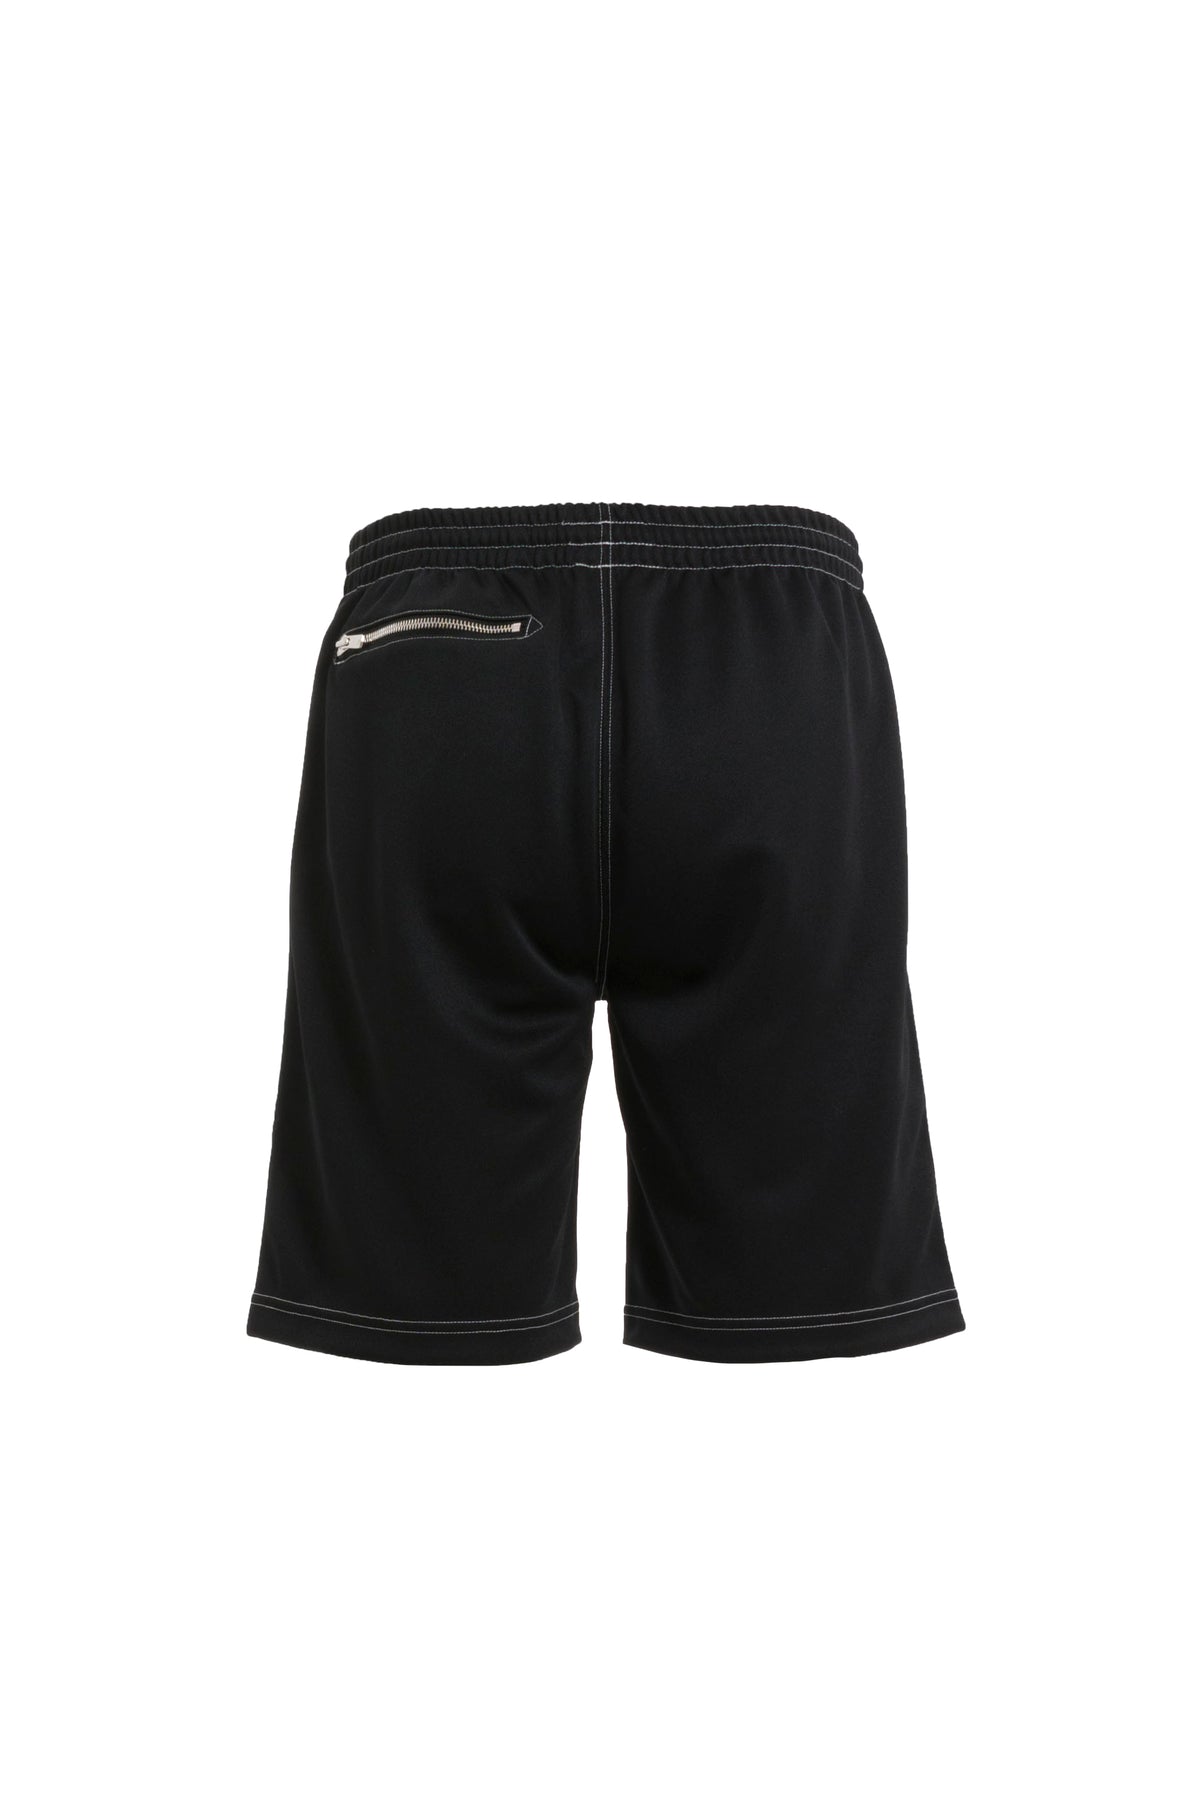 TRACK SHORTS - POLY SMOOTH(EXCLUSIVE) / BLK WHT